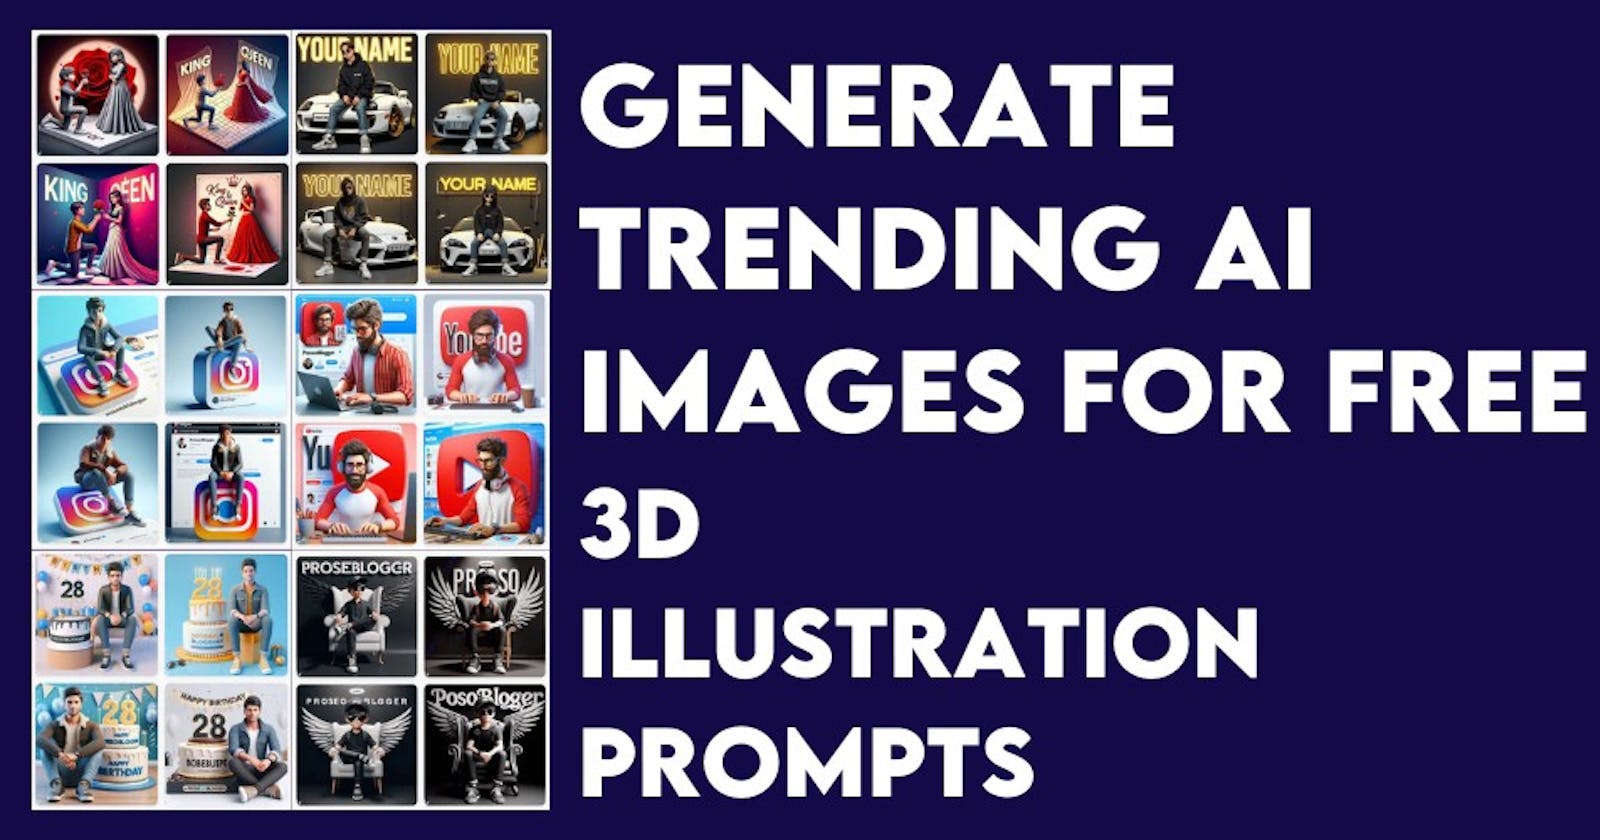 How To Generate Trending AI Images For Free